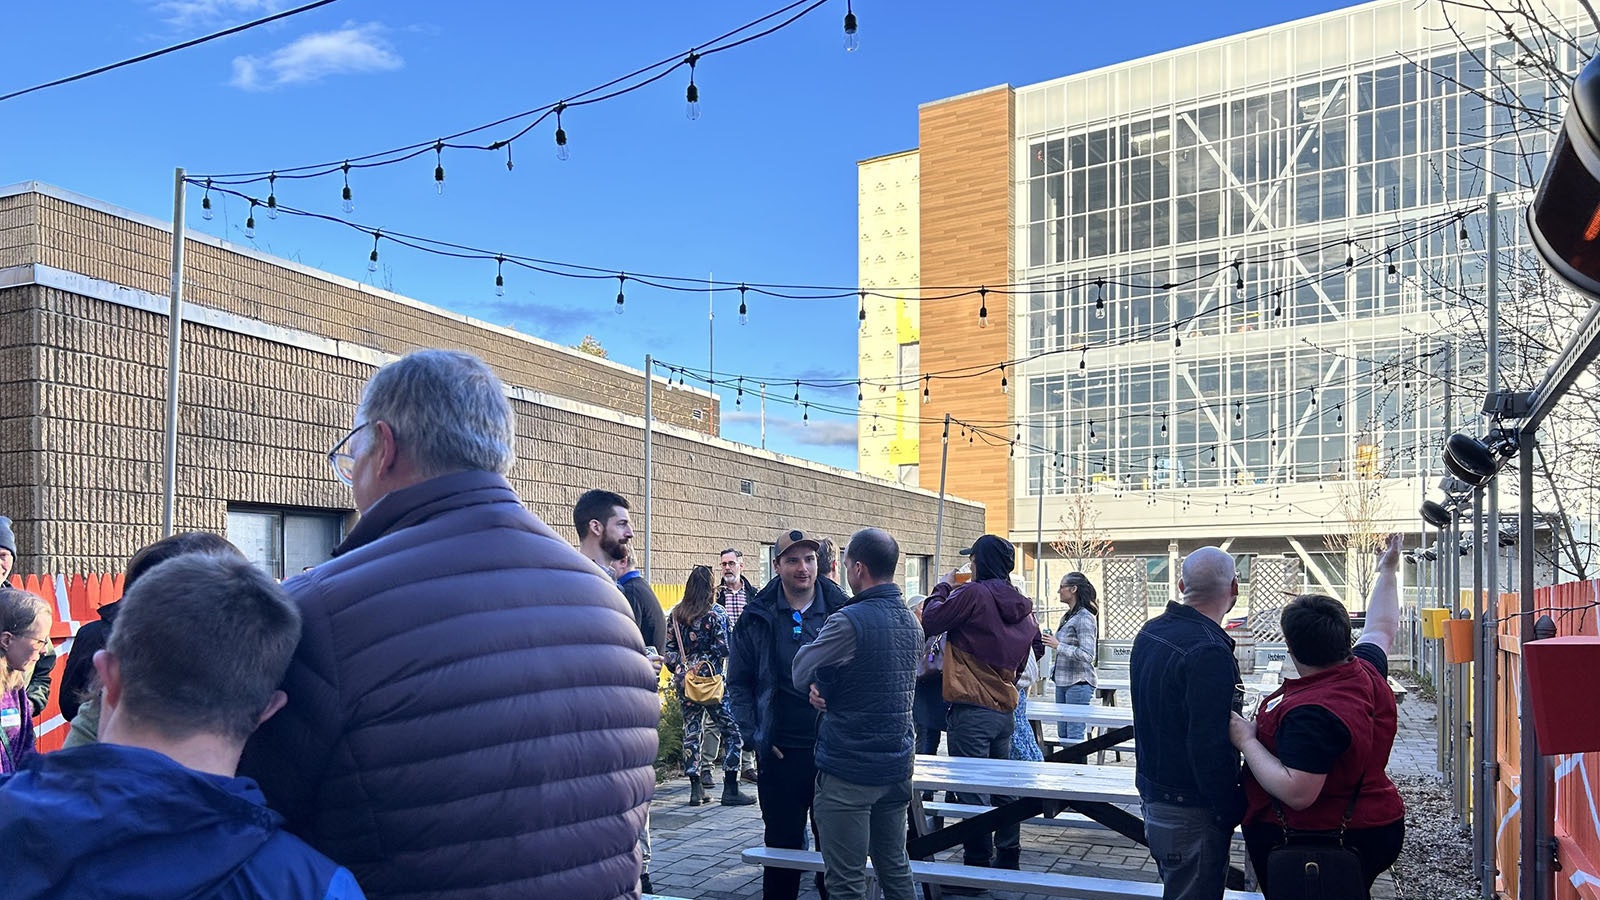 A party outside the Vertical Harvest flagship facility in Jackson, Wyoming.